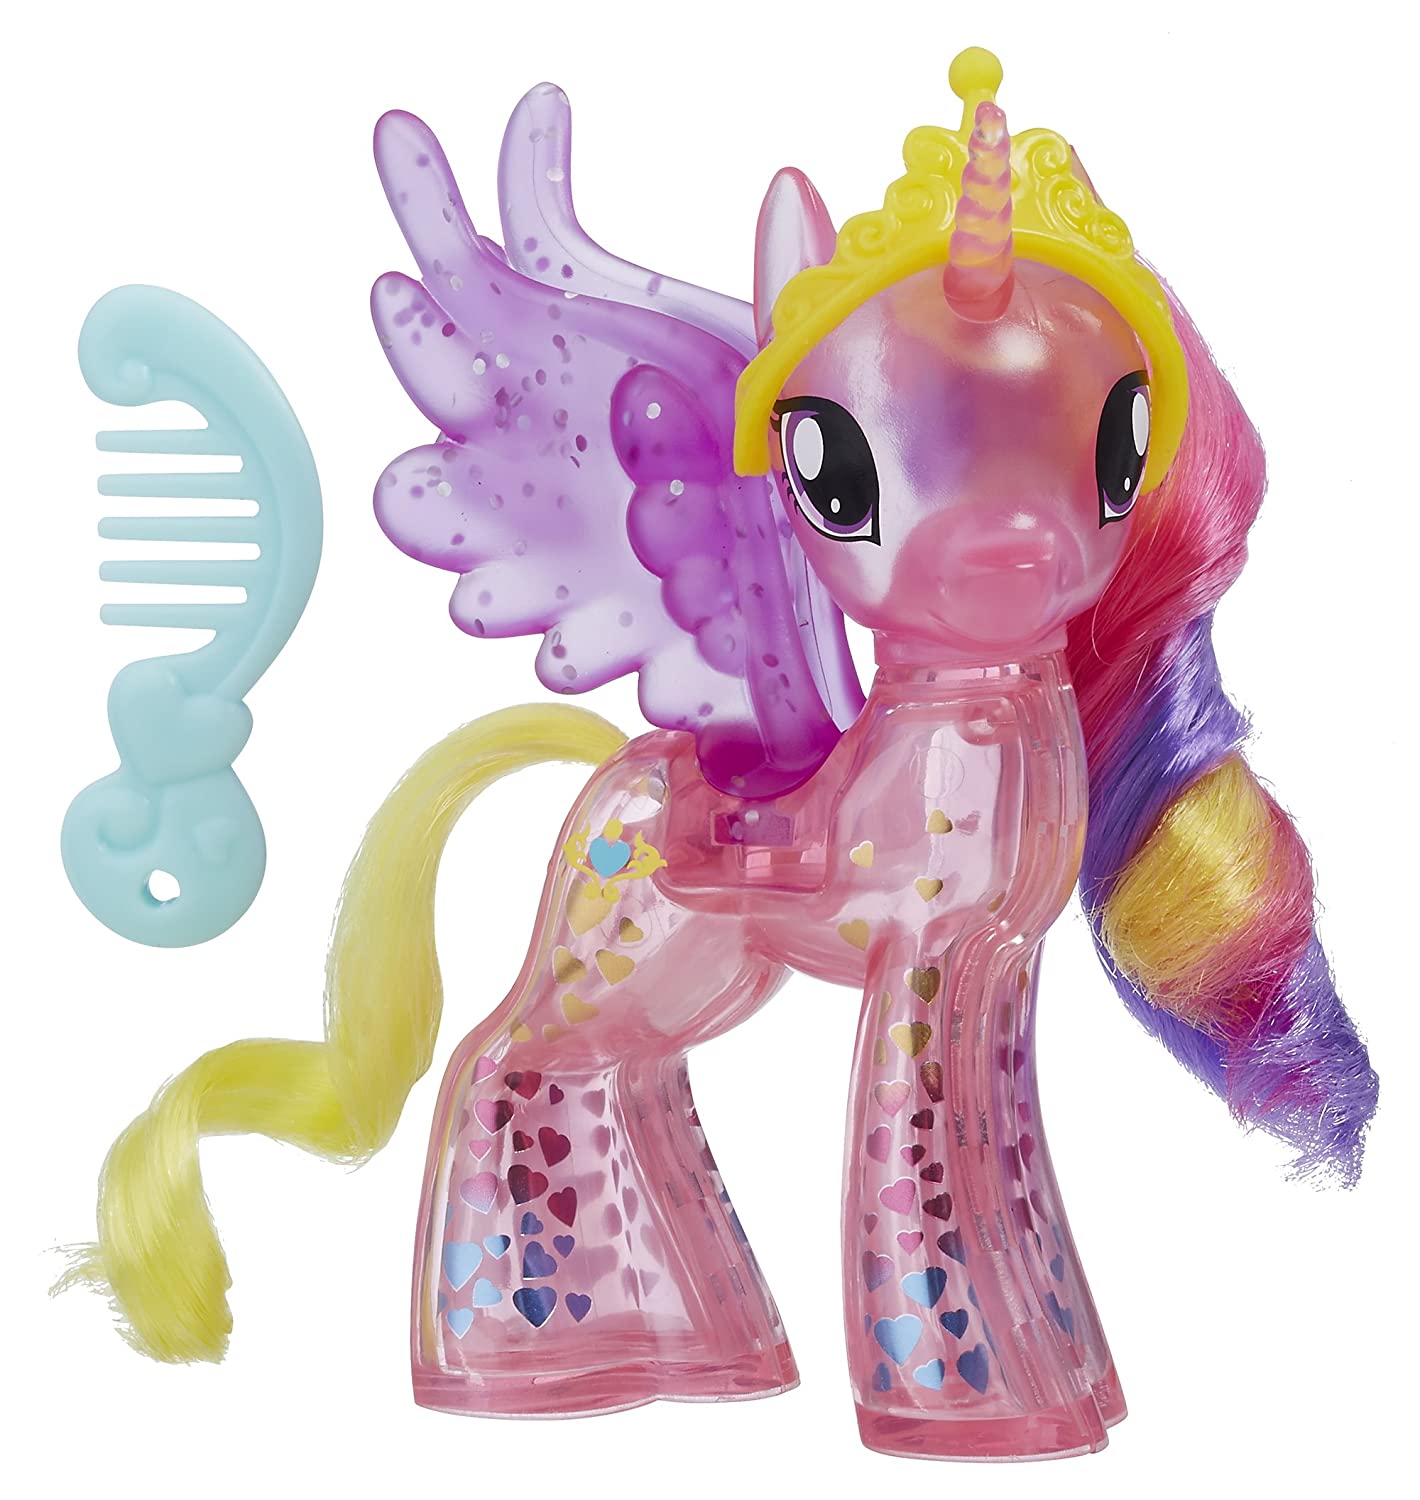 Top 11 Best My Little Pony Toys Reviews in 2023 11